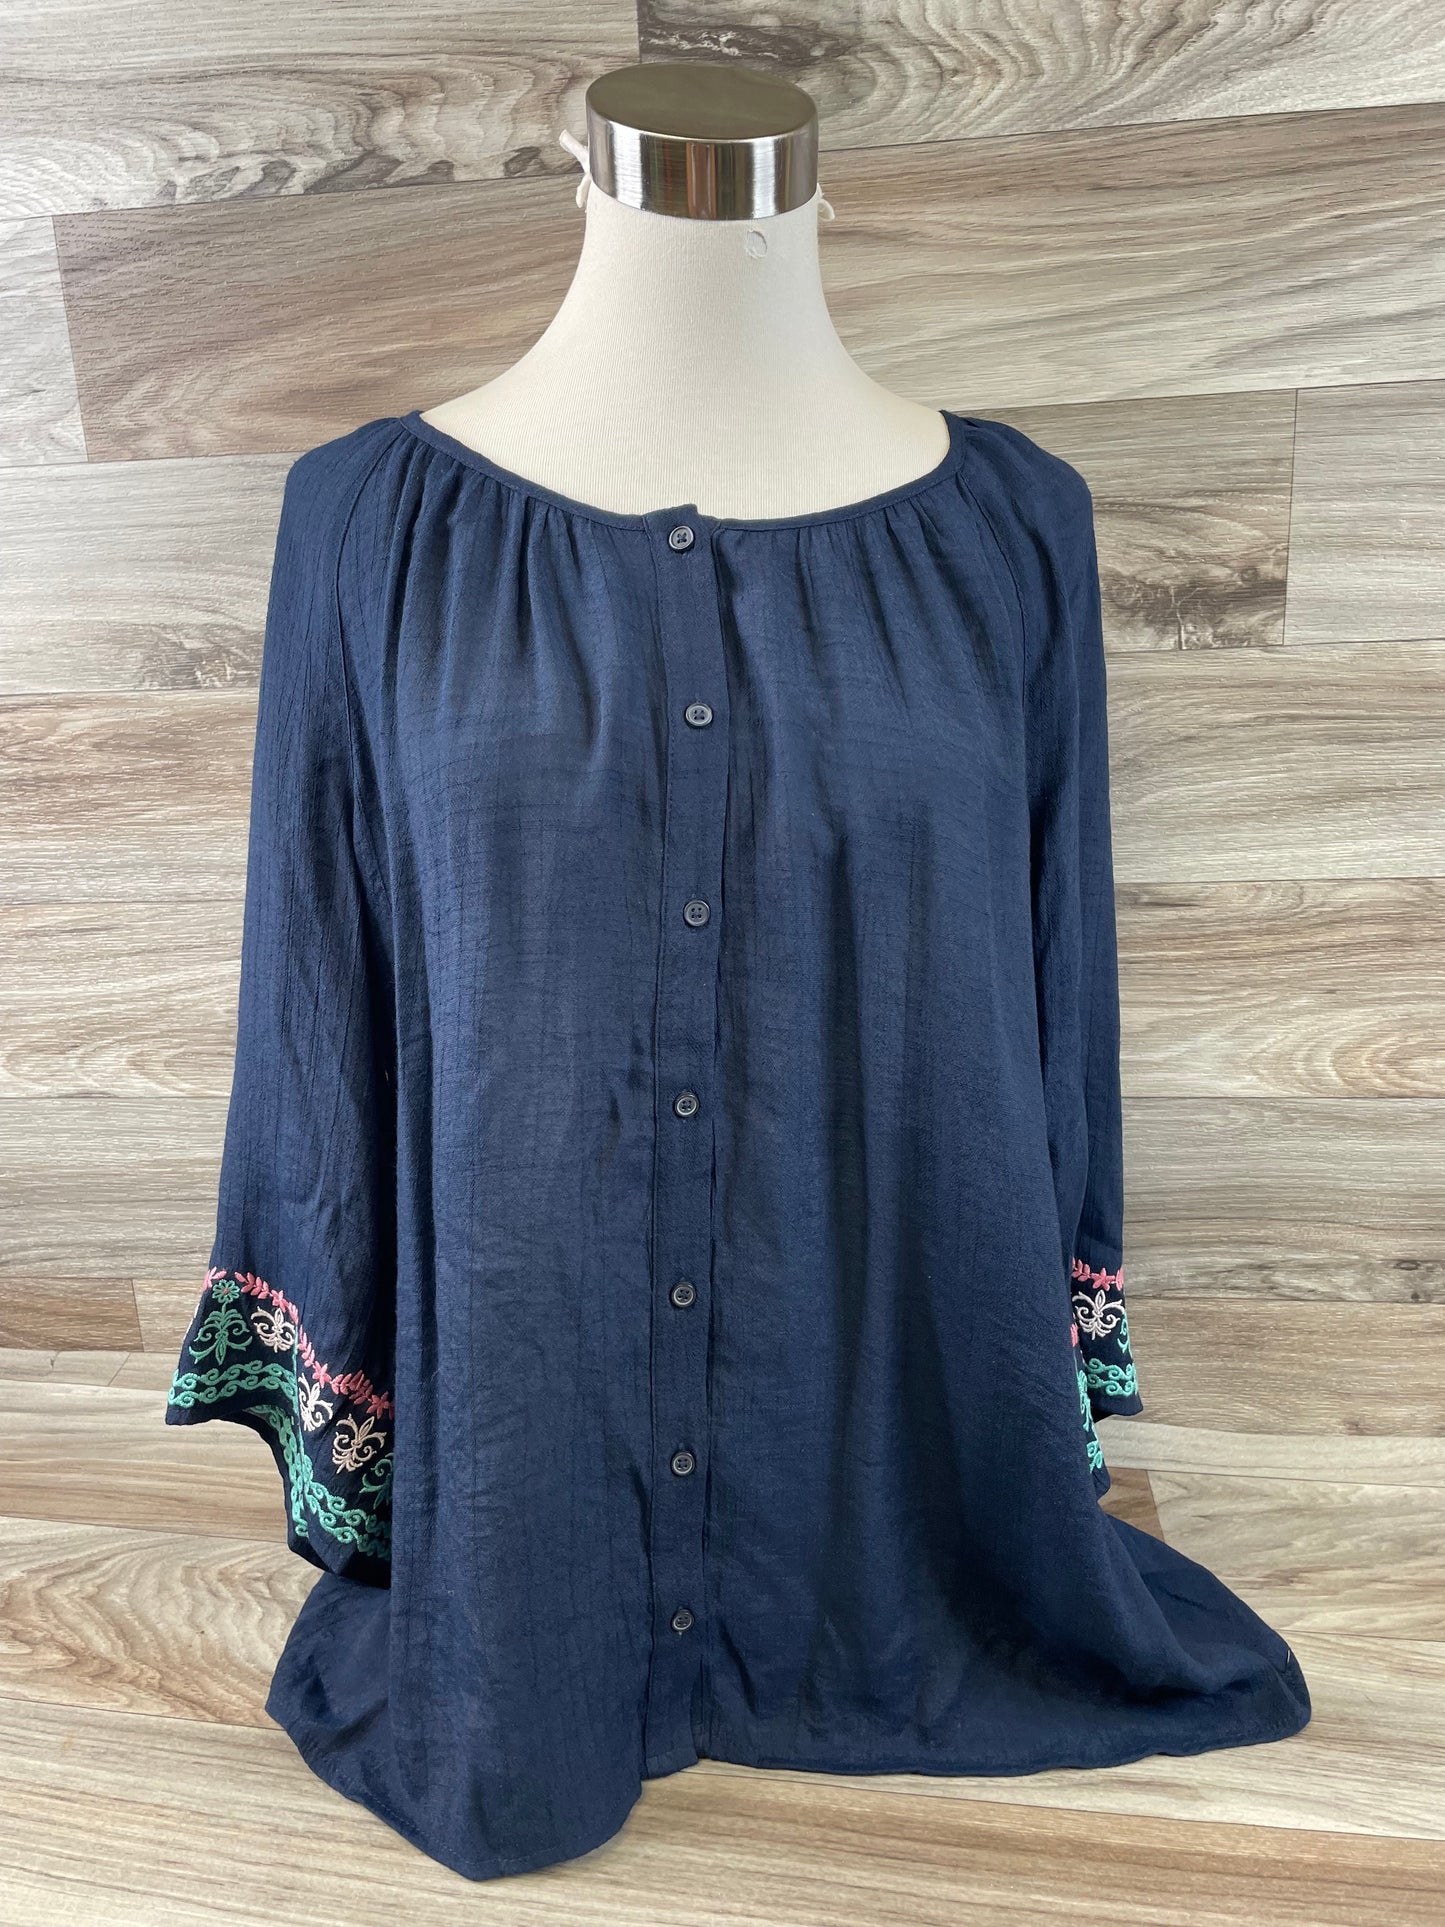 Navy Top Short Sleeve Christopher And Banks, Size Xl